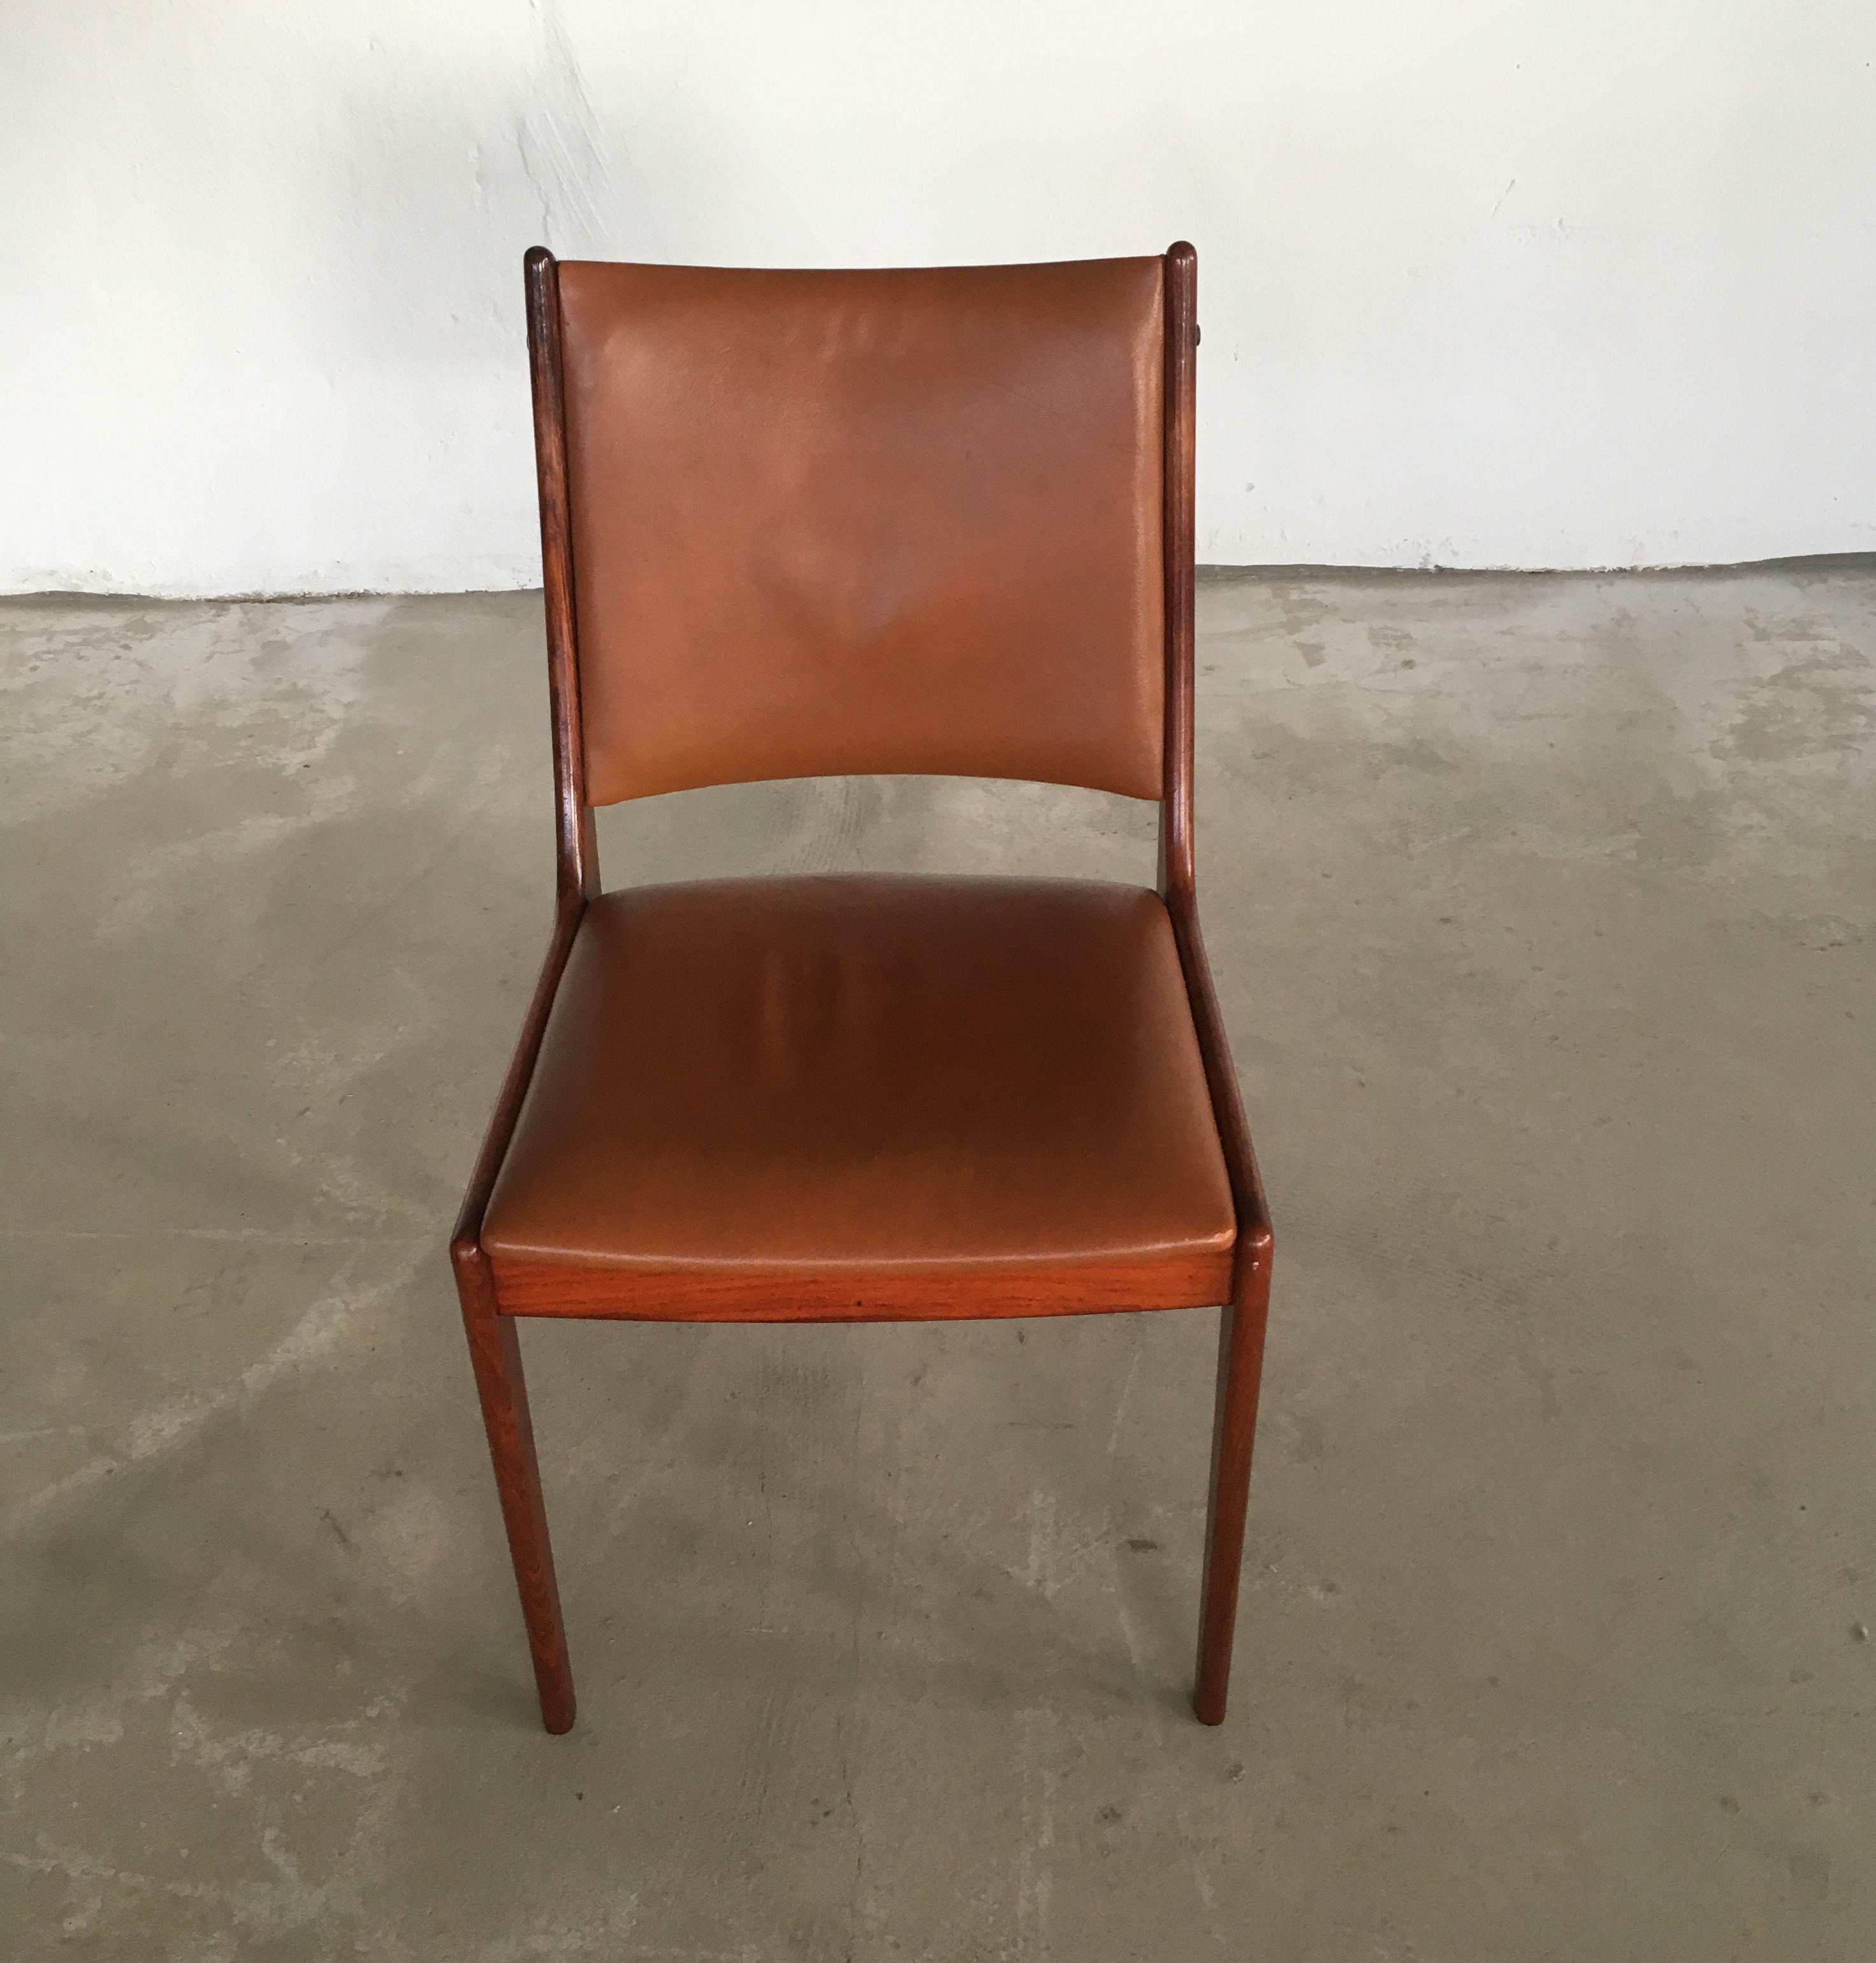 Set of six 1960s Johannes Andersen dining chairs in rosewood made by Uldum Møbler, Denmark.

The set of dining chairs feature a clean simple yet elegant design that will fit in well in most houses. 

The chairs have been restored and refinished